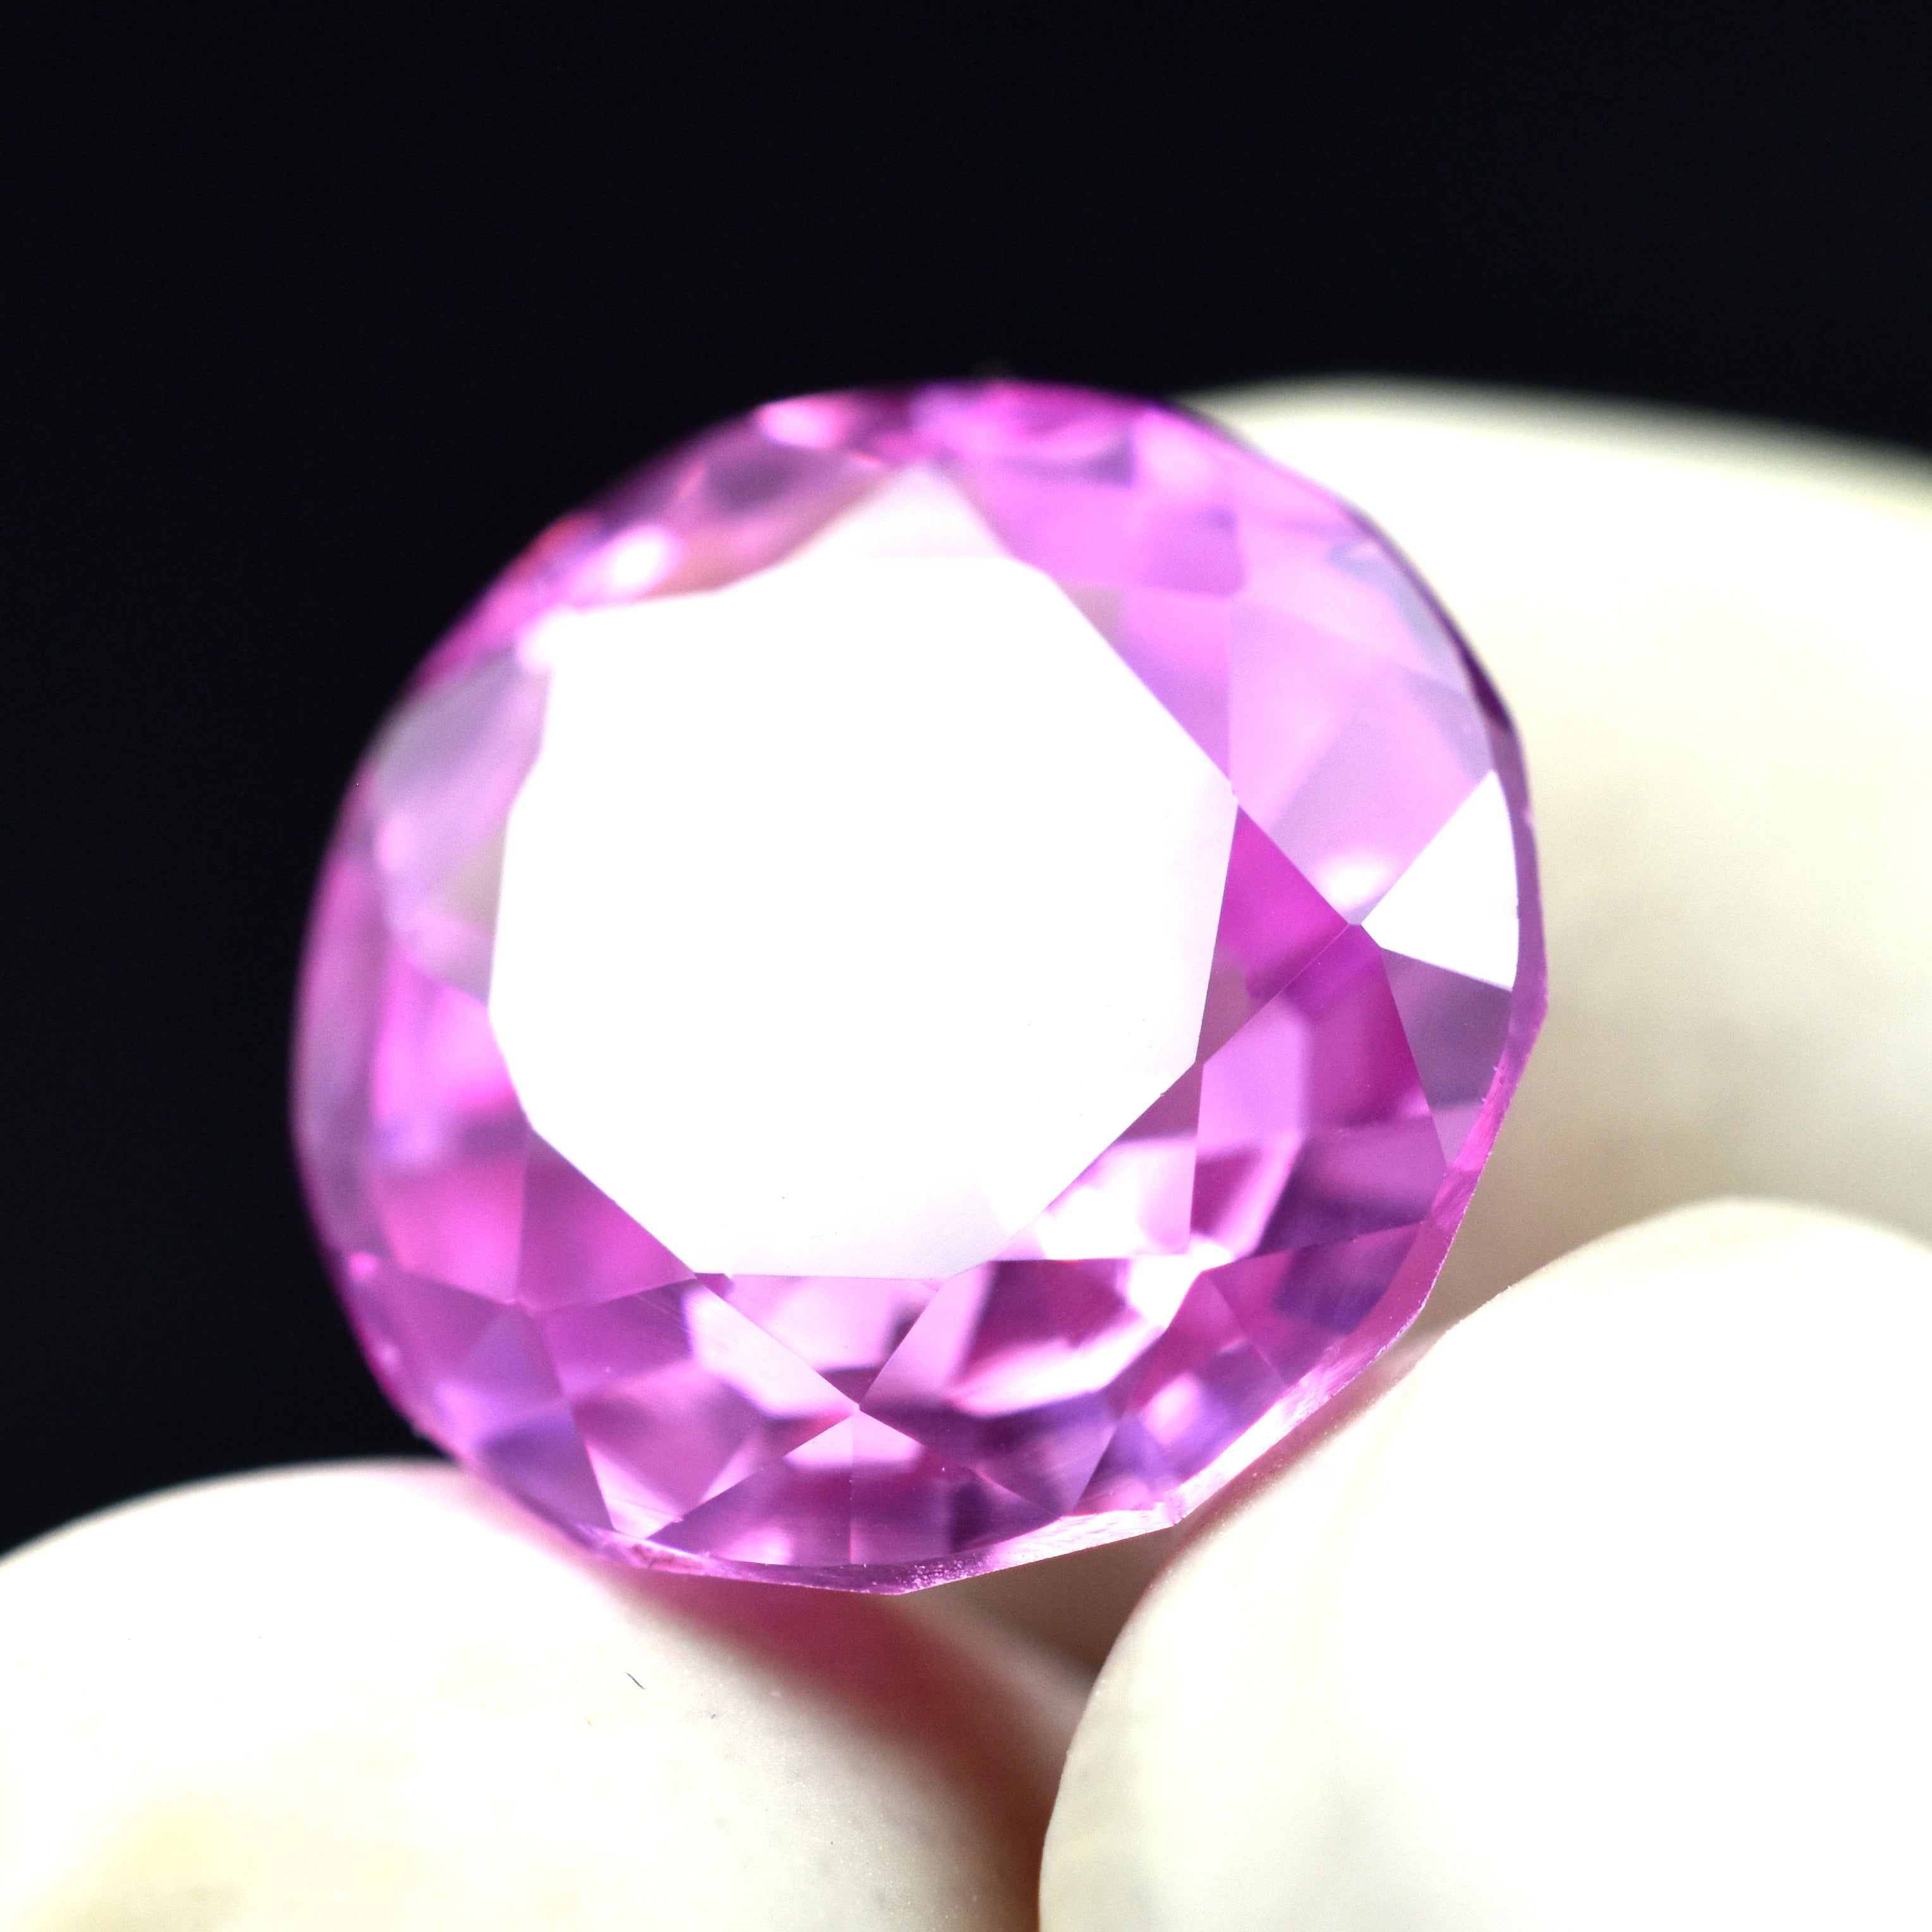 9.33 Carat Round Cut Pink Ruby Certified Loose Gemstone Best For Ring/Pendent Making Natural Pink Ruby gemstone